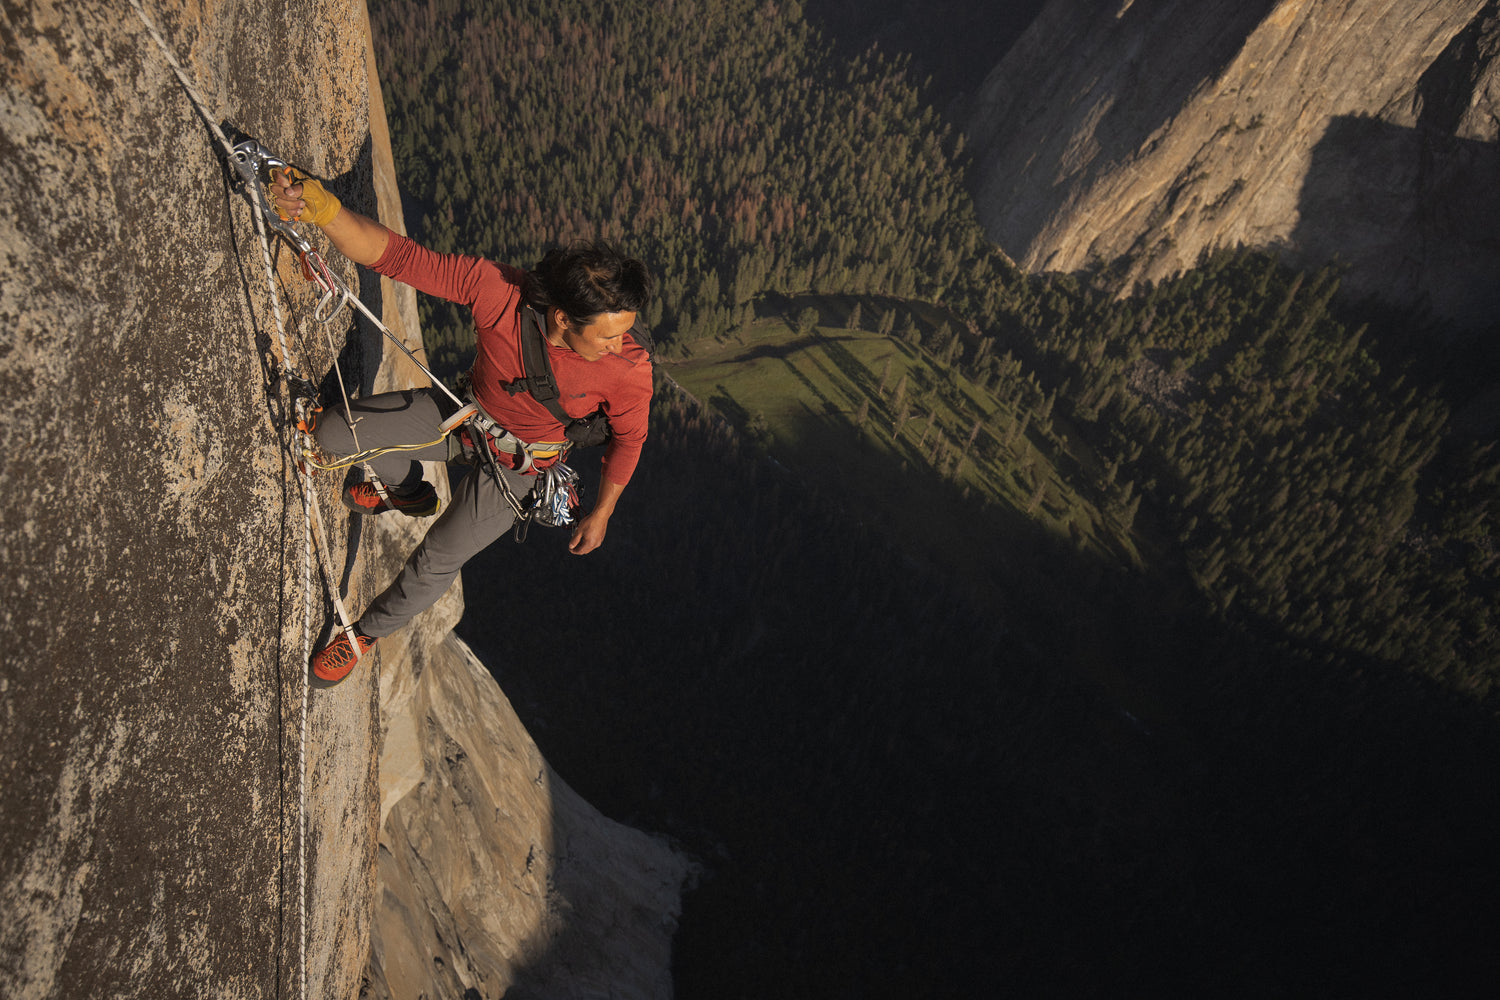 RENOWNED ADVENTURER JIMMY CHIN JOINS BREMONT